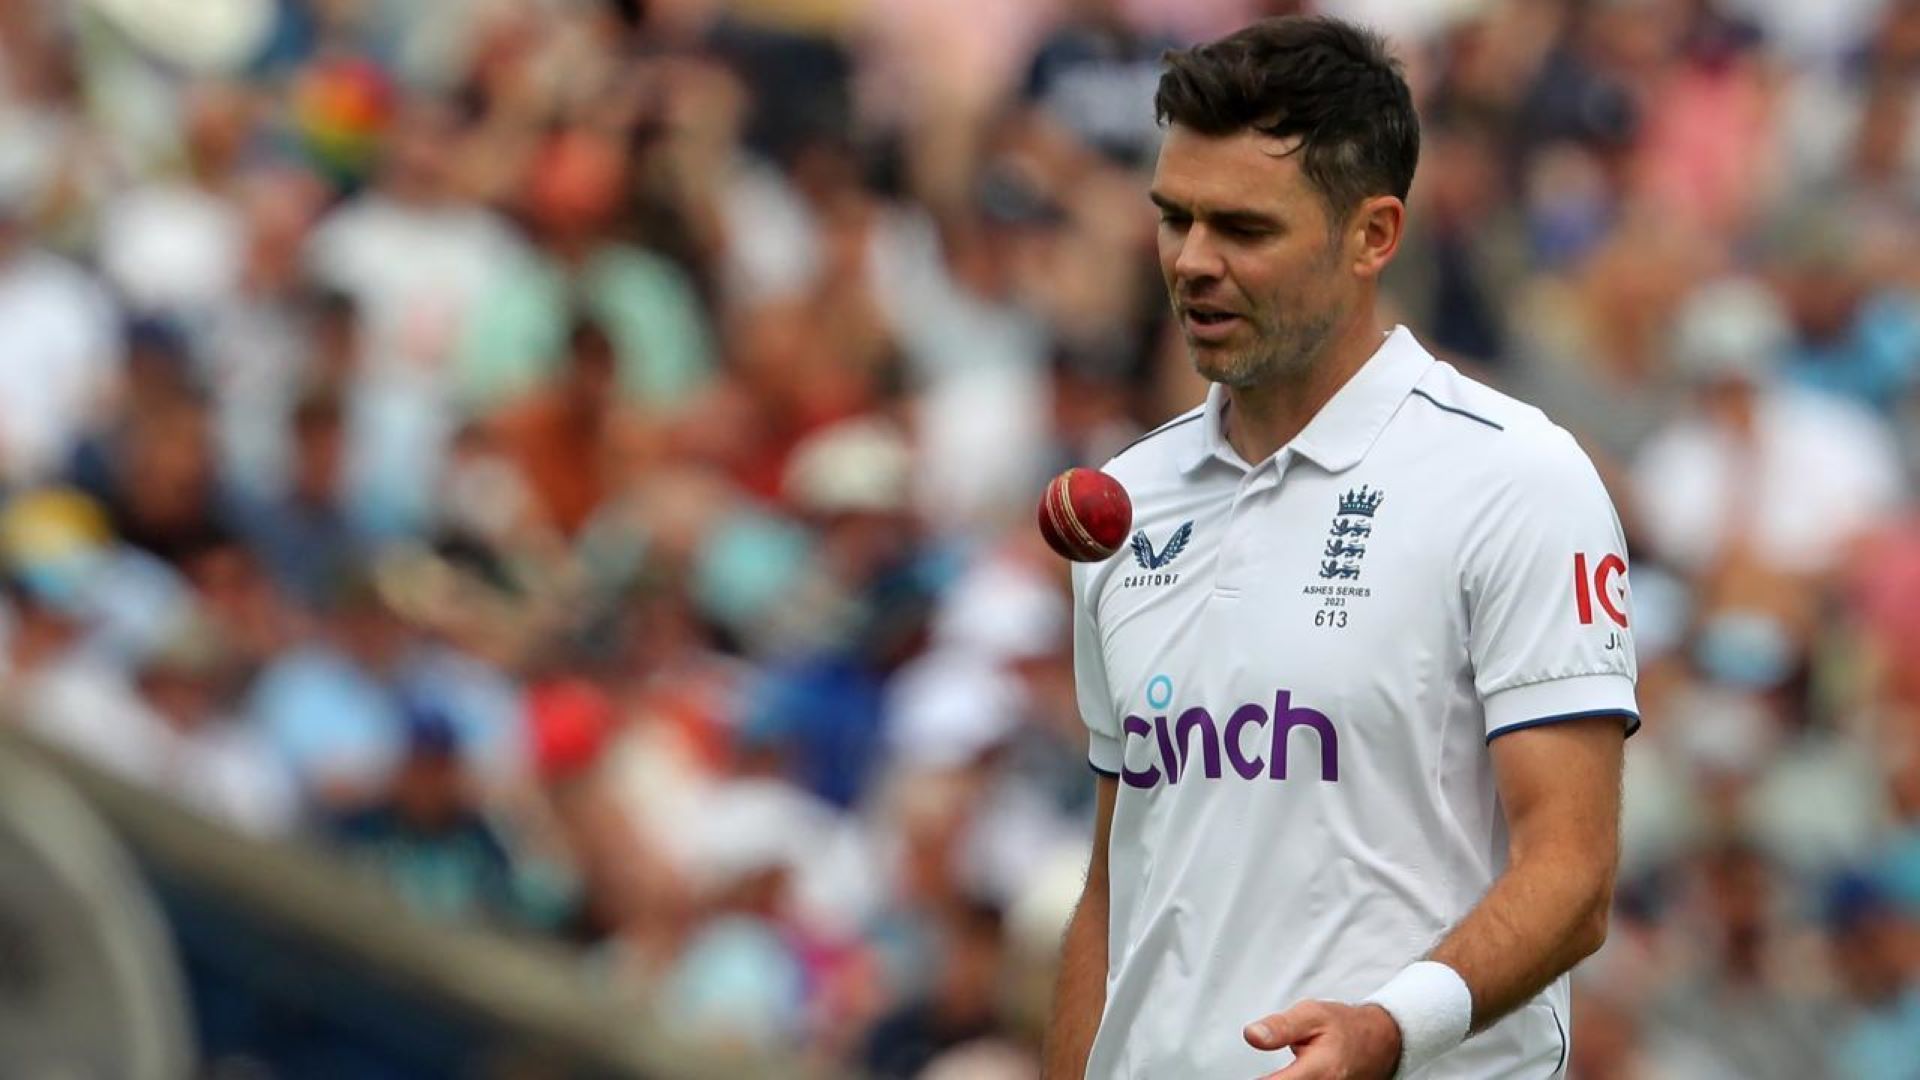 James Anderson had a disastrous first two Tests before missing out in the third game.